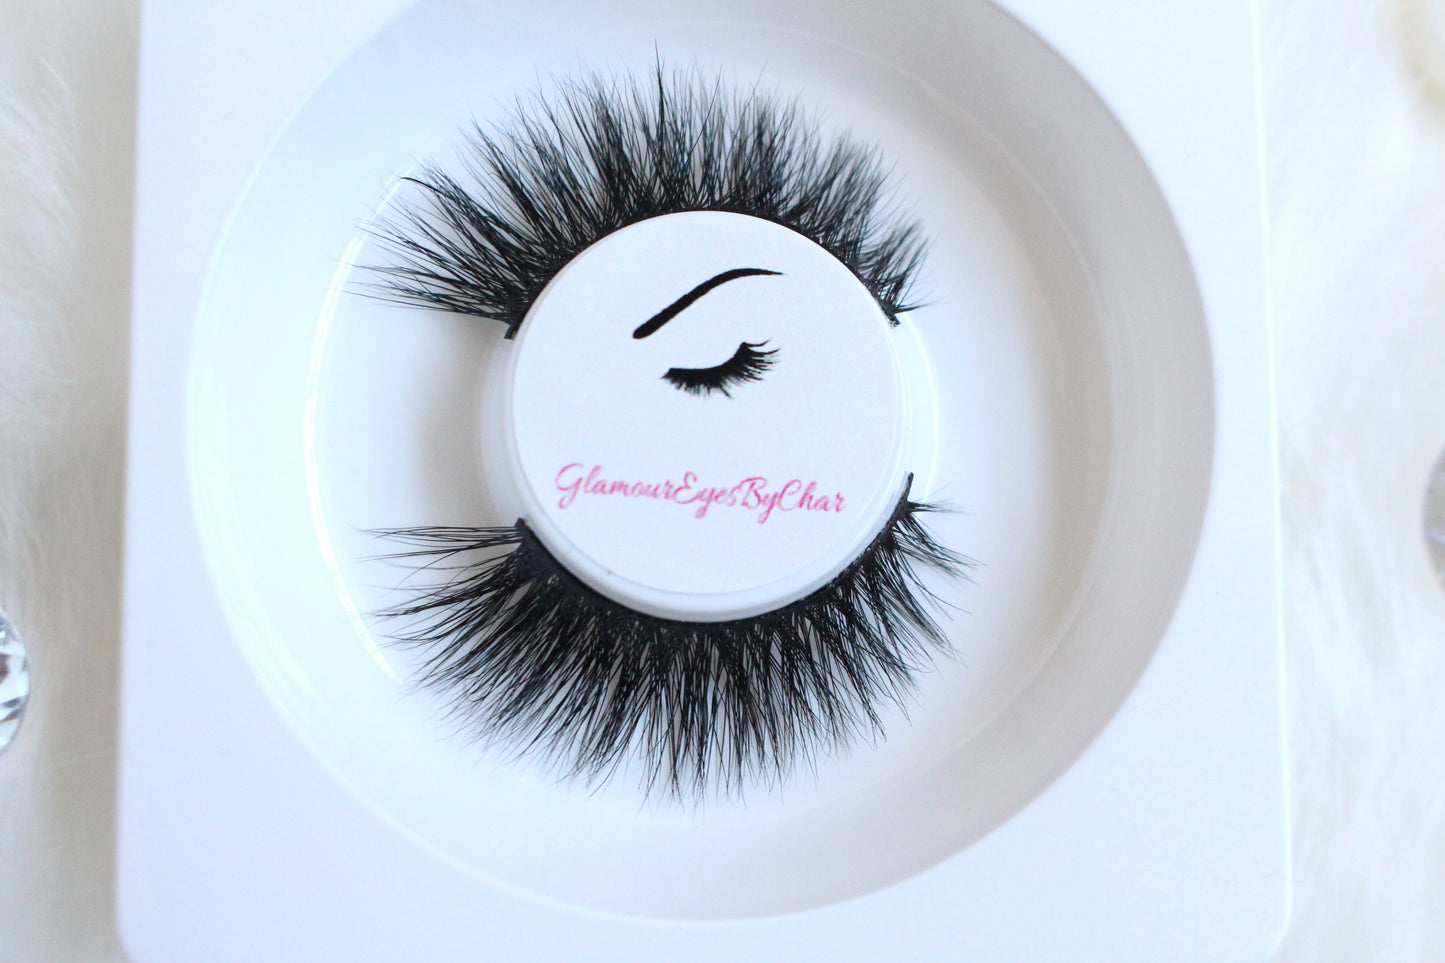 These 3D luxurious mink lashes are called Flirty and are 8-18mm in length. They're shorter on the inner corner and longer on outer corner for the forever-glam winged out effect. The thin lashband, makes the application process a breeze.